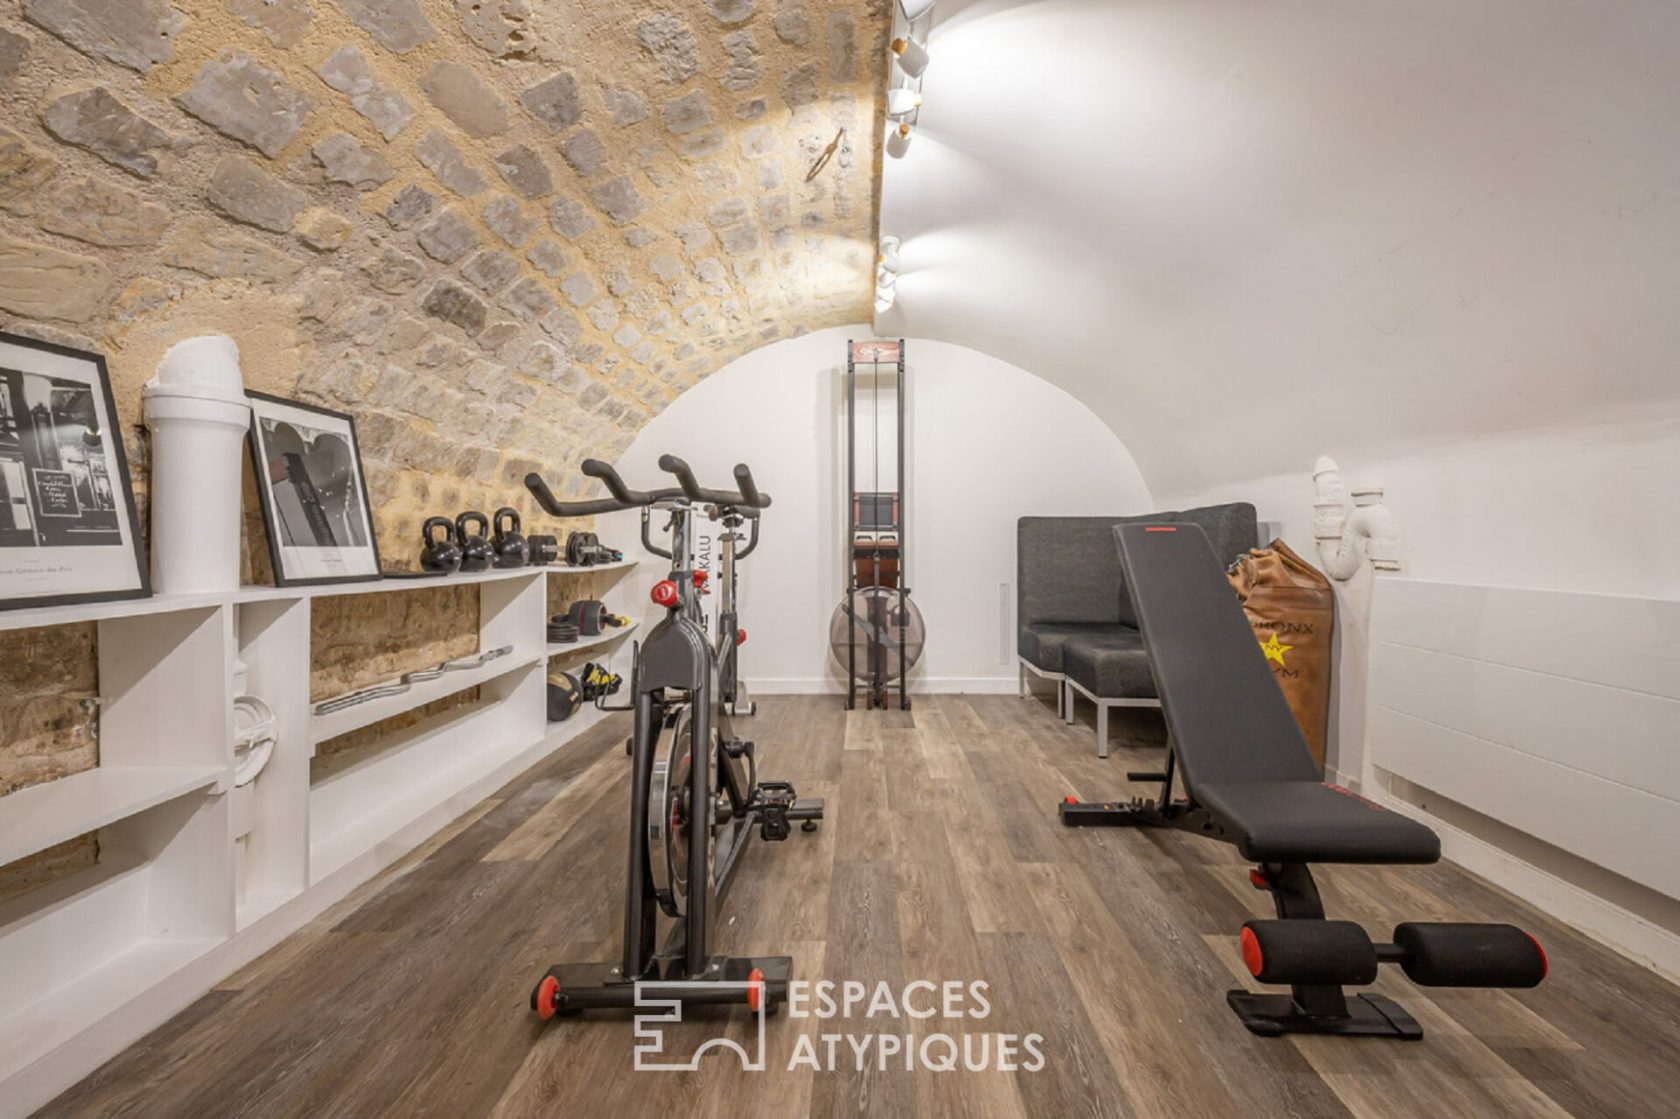 Loft in the basement with vaulted cellars